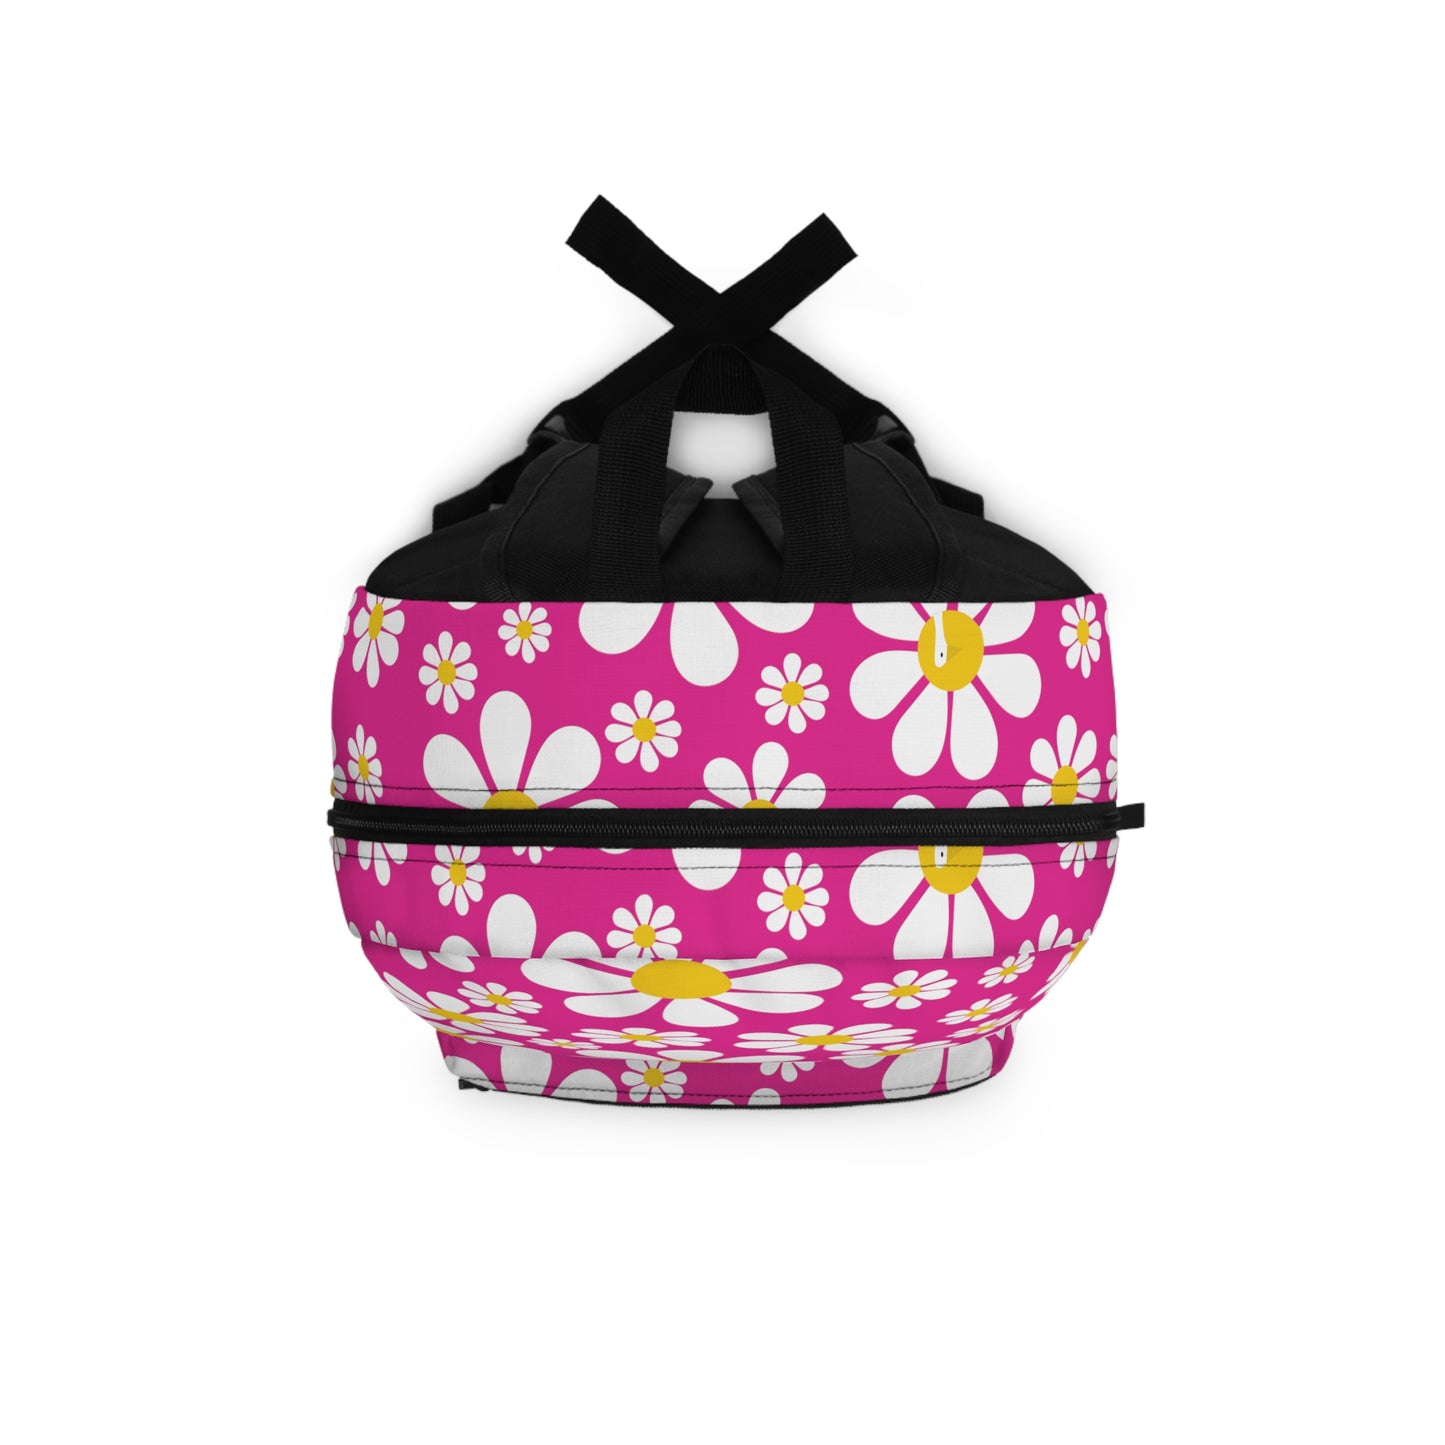 Ducks in Daisies - Mean Girls Lipstick ff00a8 - Backpack